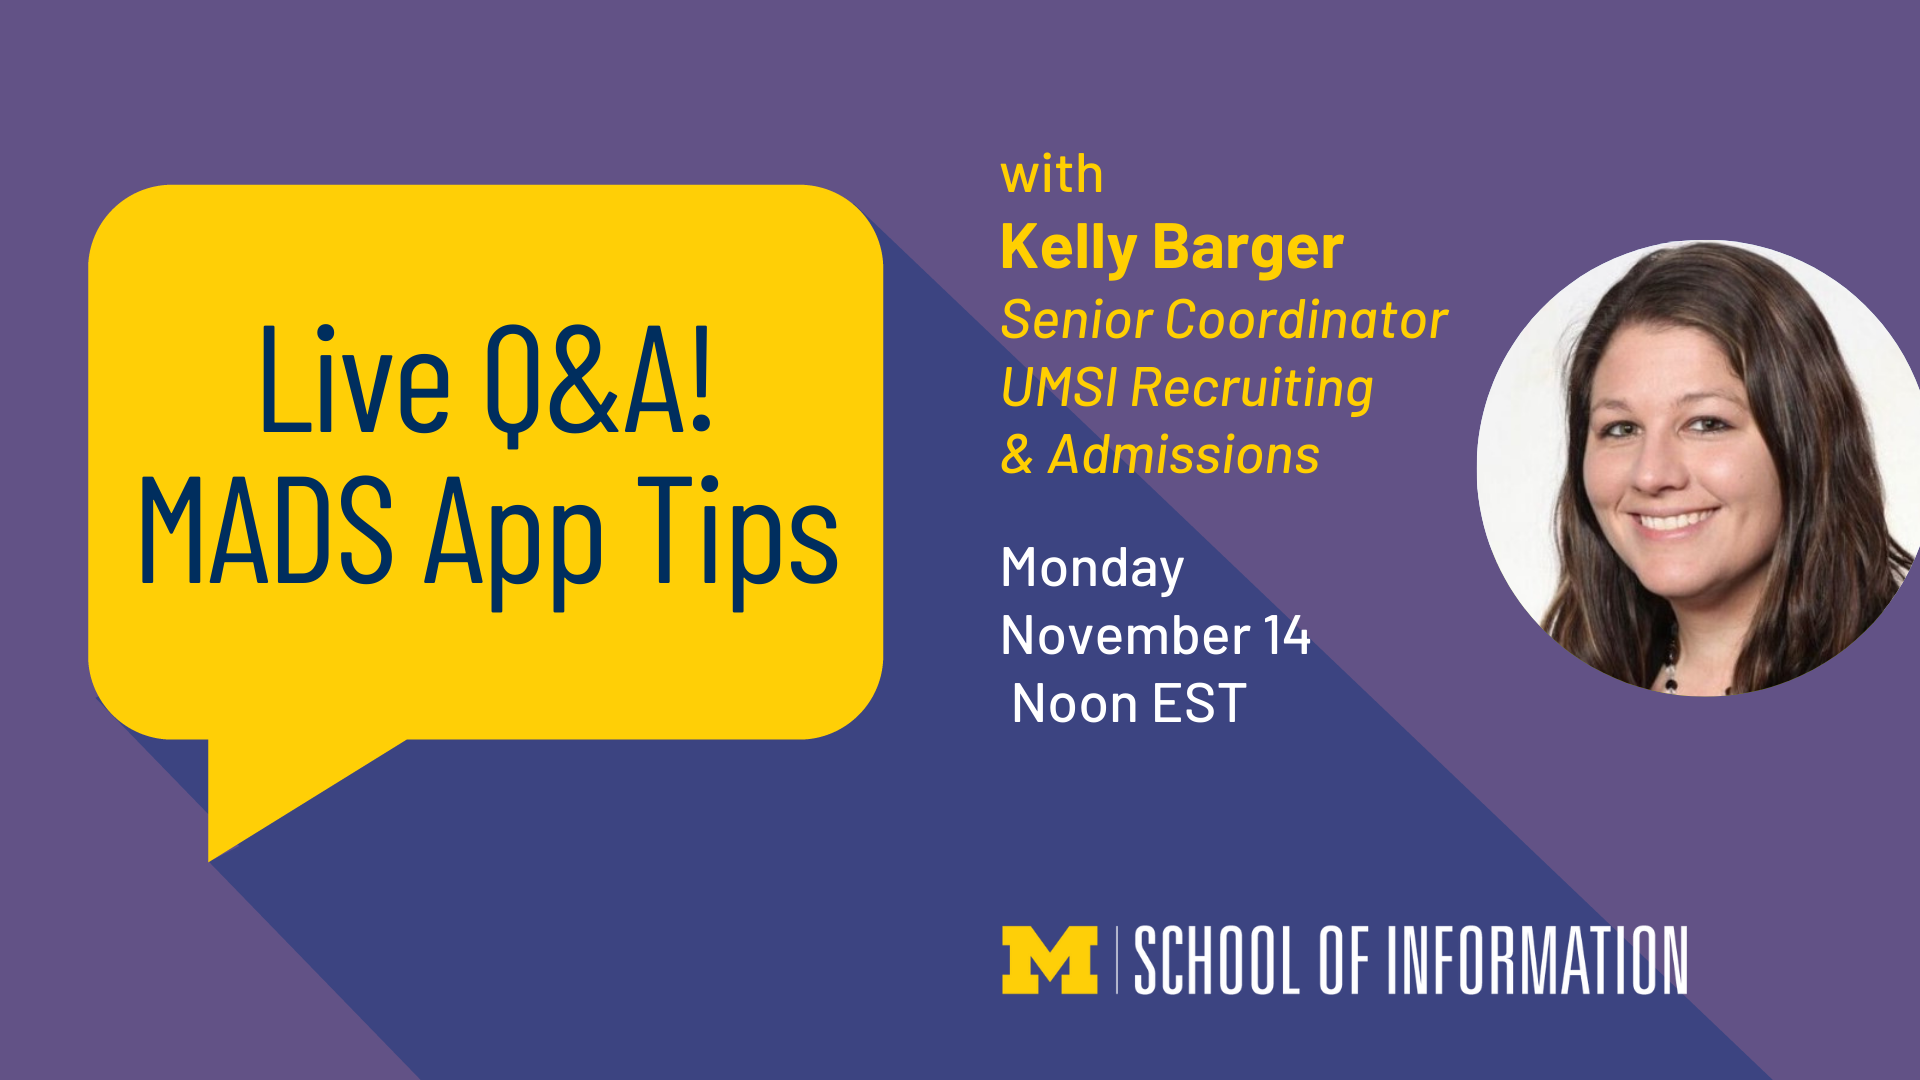 "Live Q&A! MADS App Tips with Kelly Barger, Senior Coordinator, UMSI Recruiting & Admissions. Monday, November 14. Noon EST."